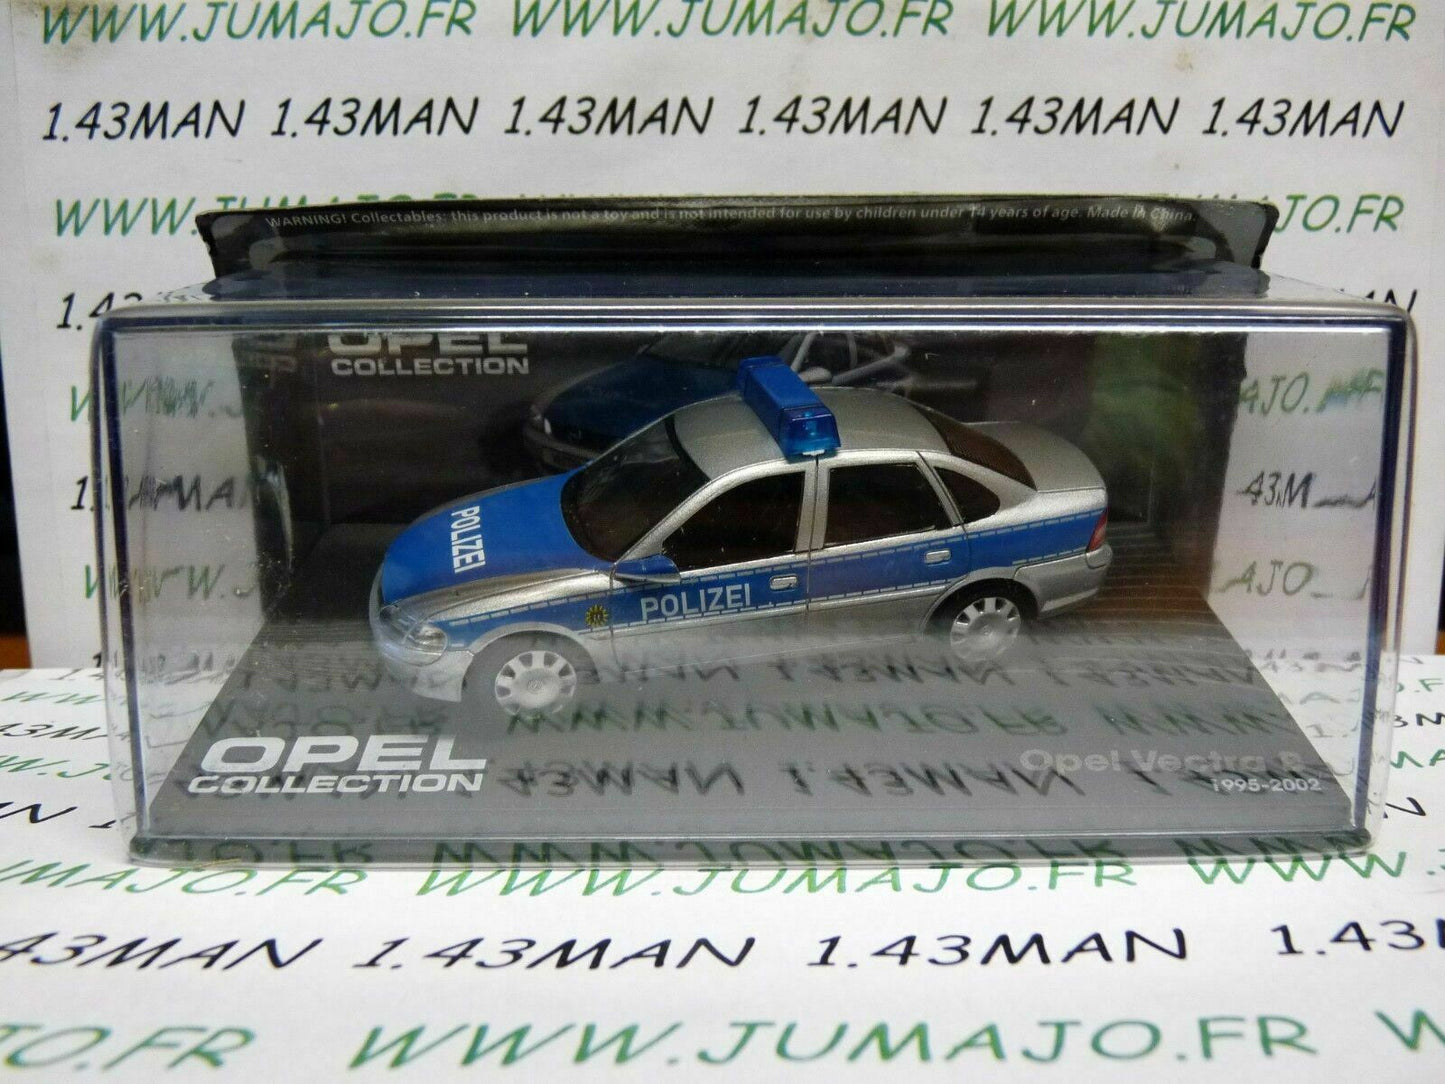 OPE45 voiture 1/43 IXO OPEL collection : VECTRA B Polizei police 1995/2002